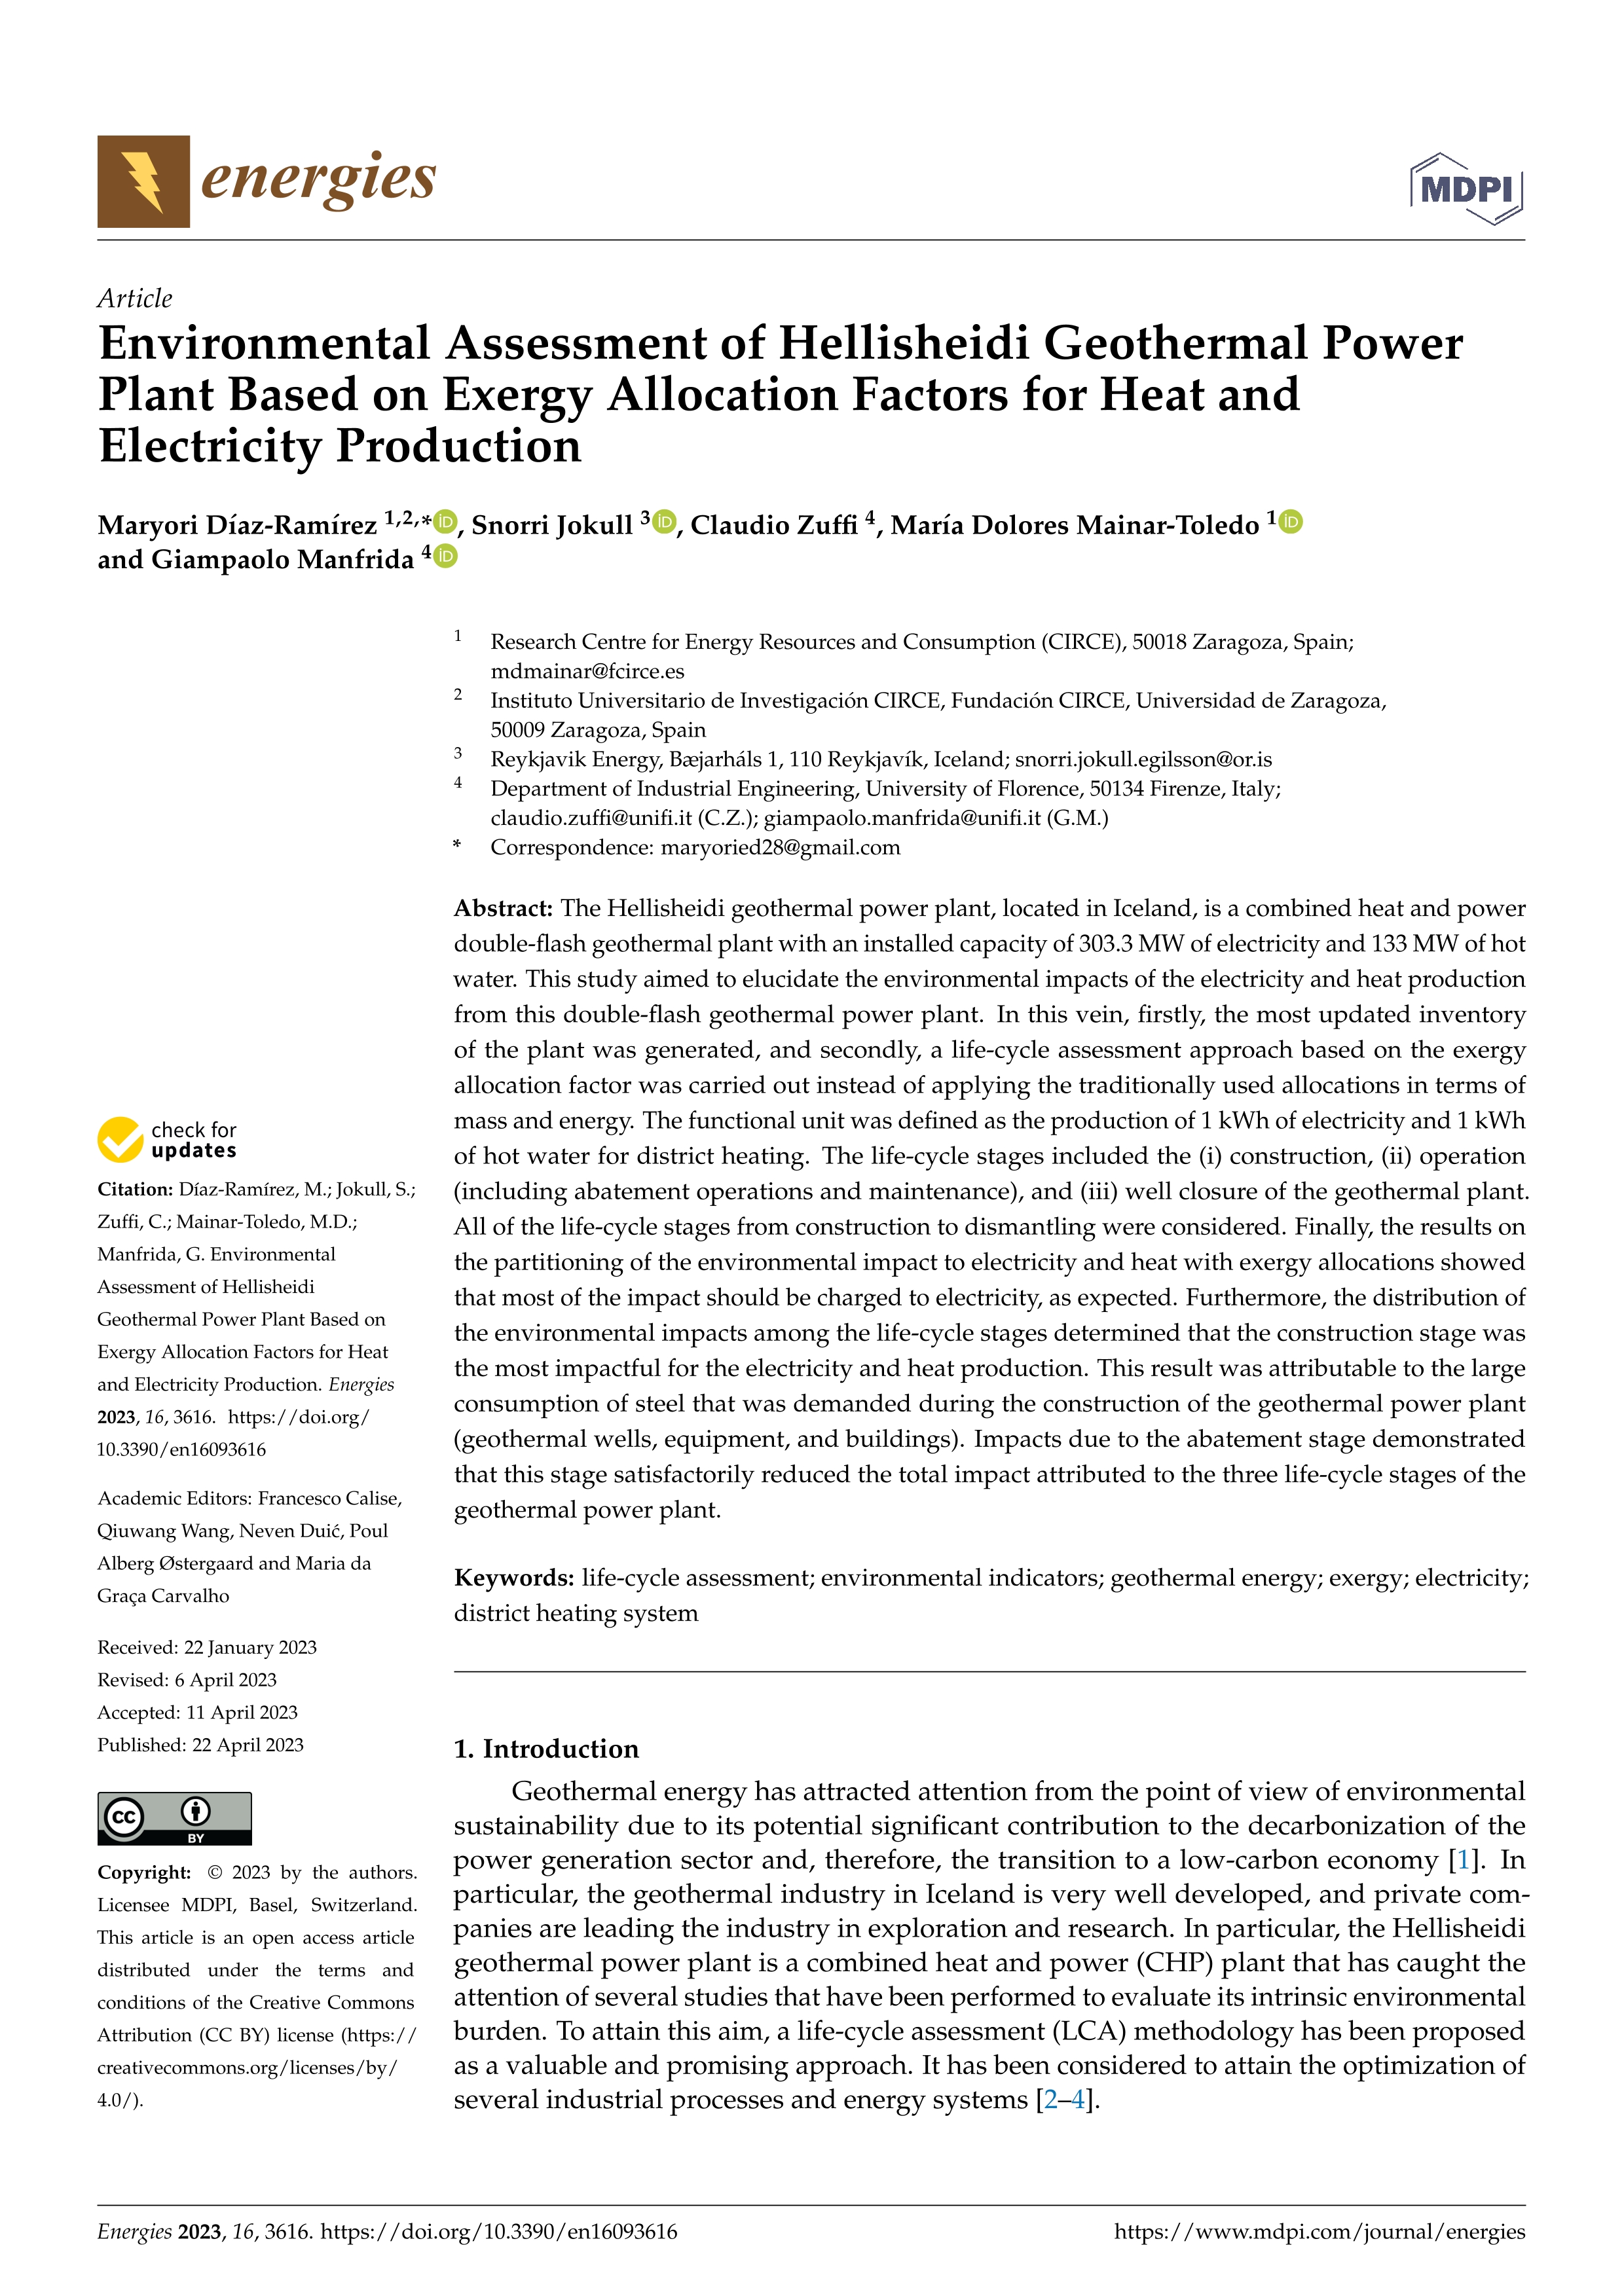 Environmental assessment of Hellisheidi Geothermal power plant based on exergy allocation factors for heat and electricity production